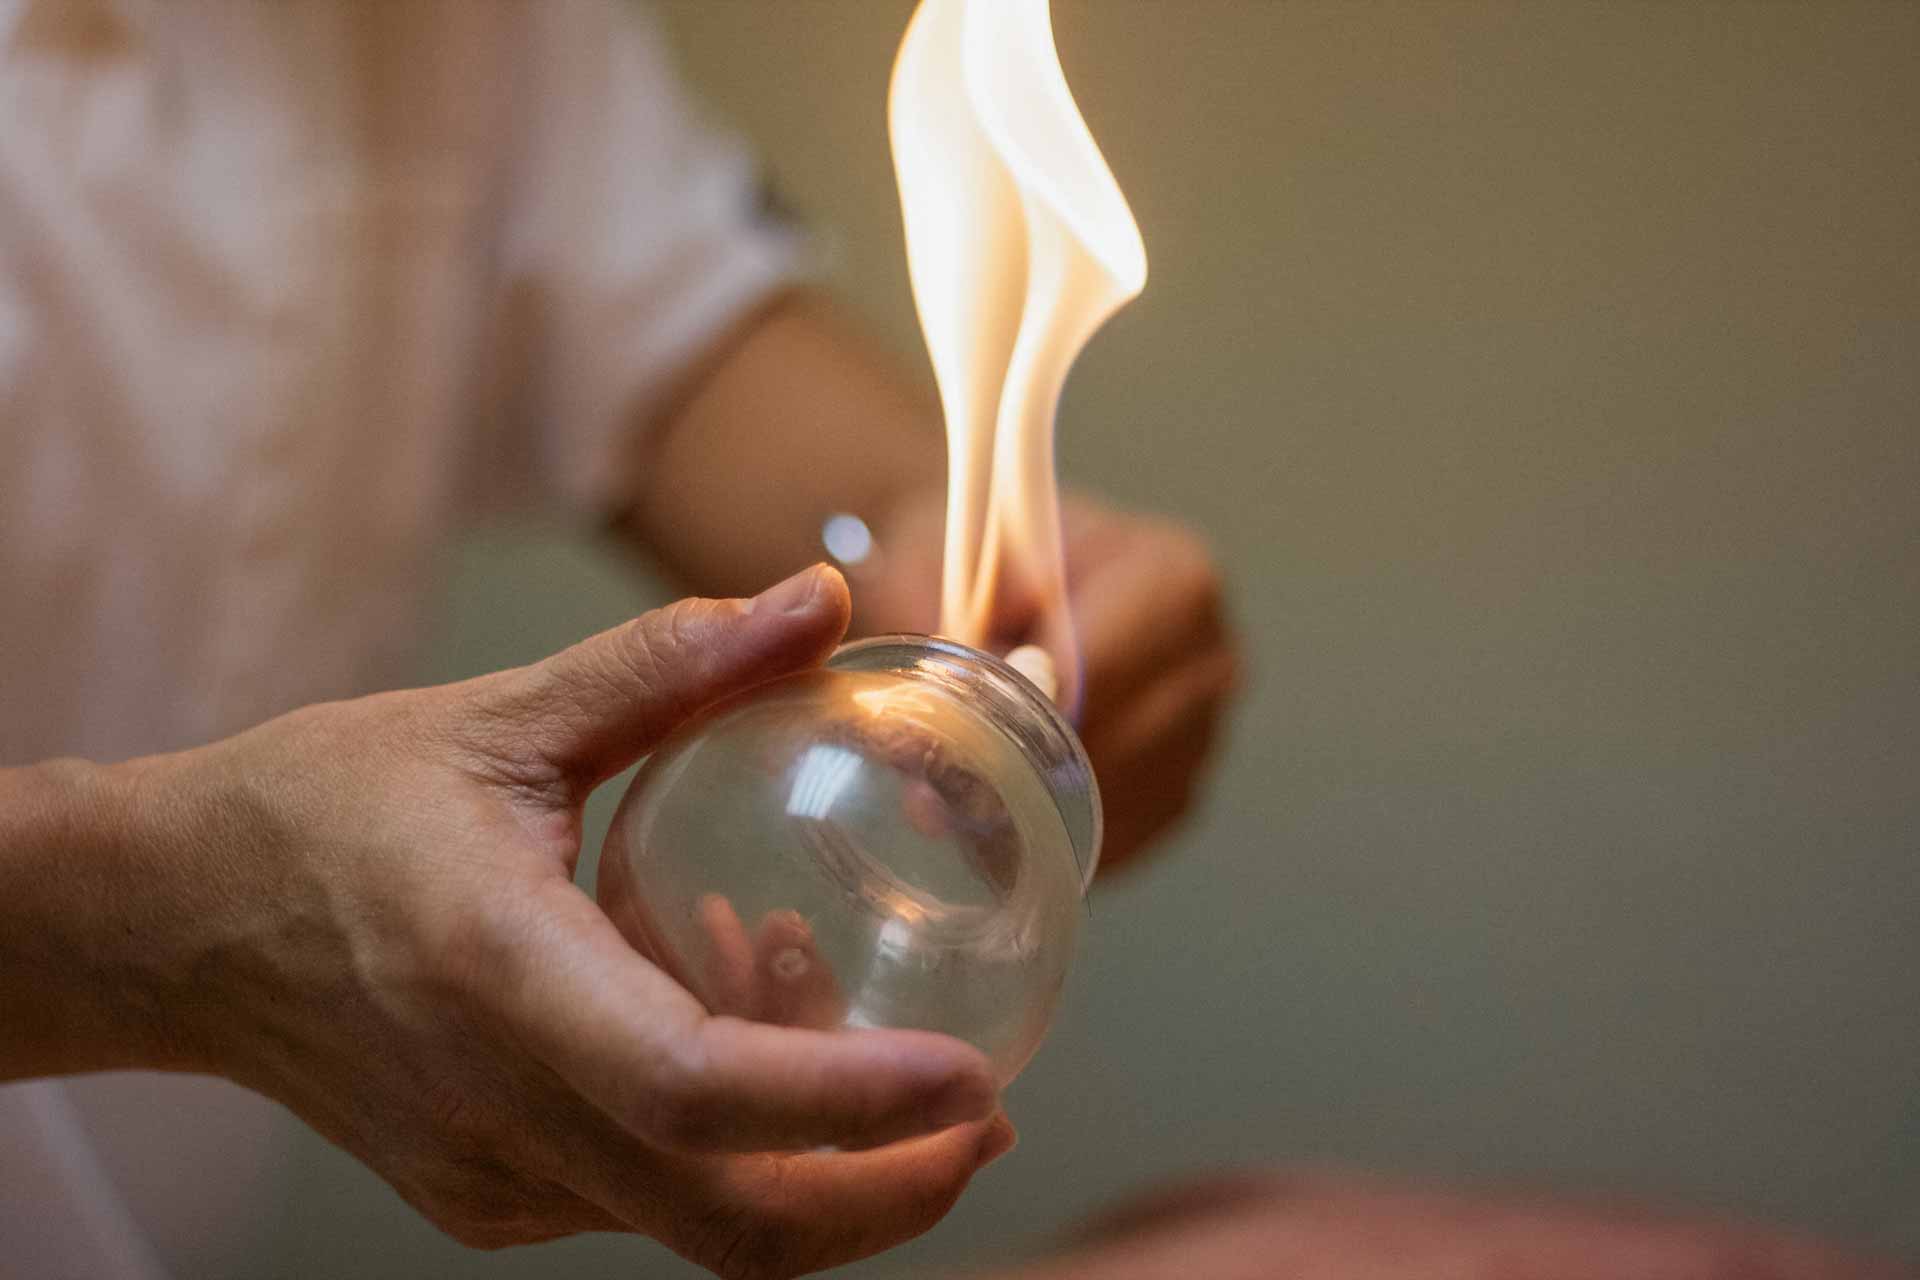 Heating up a glass cup for a fire cupping treatment